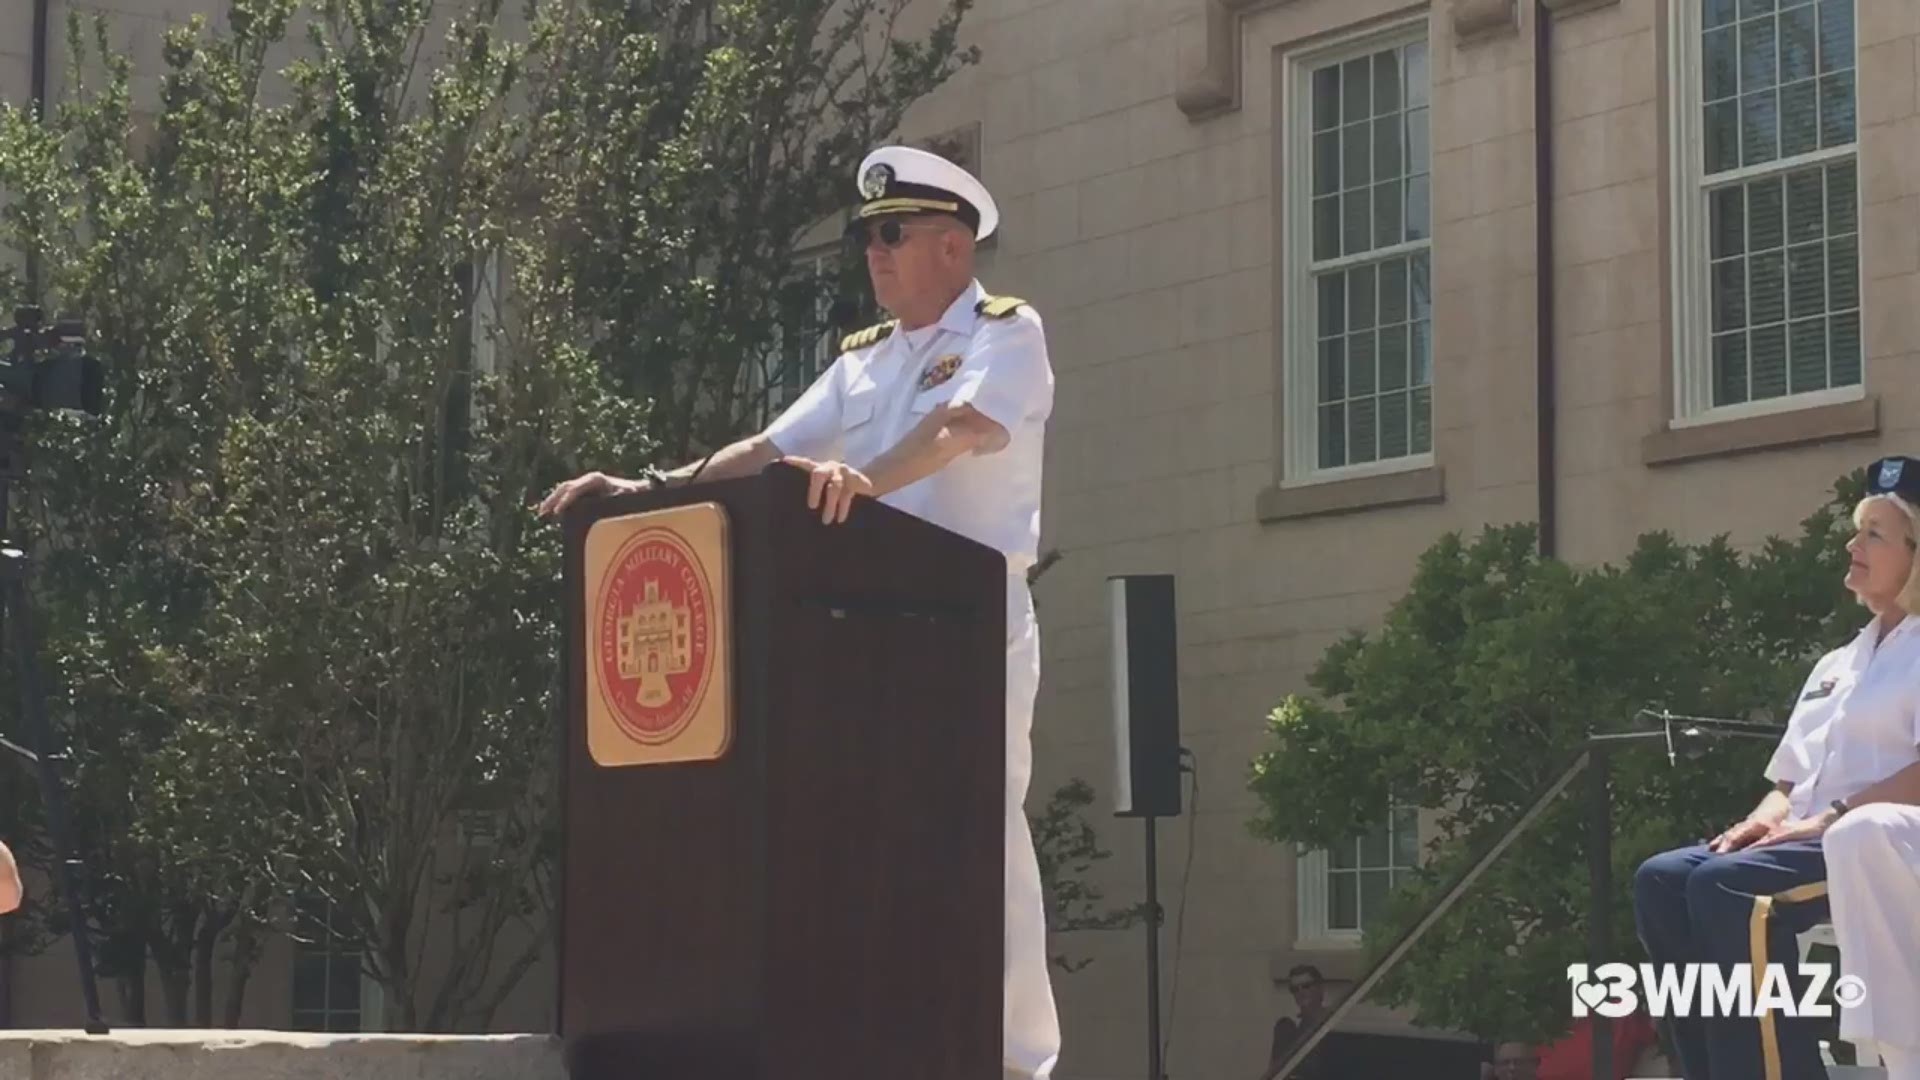 The former Fighter Pilot and six-year Prisoner of War spoke to the Corps of Cadets at Georgia Military College.